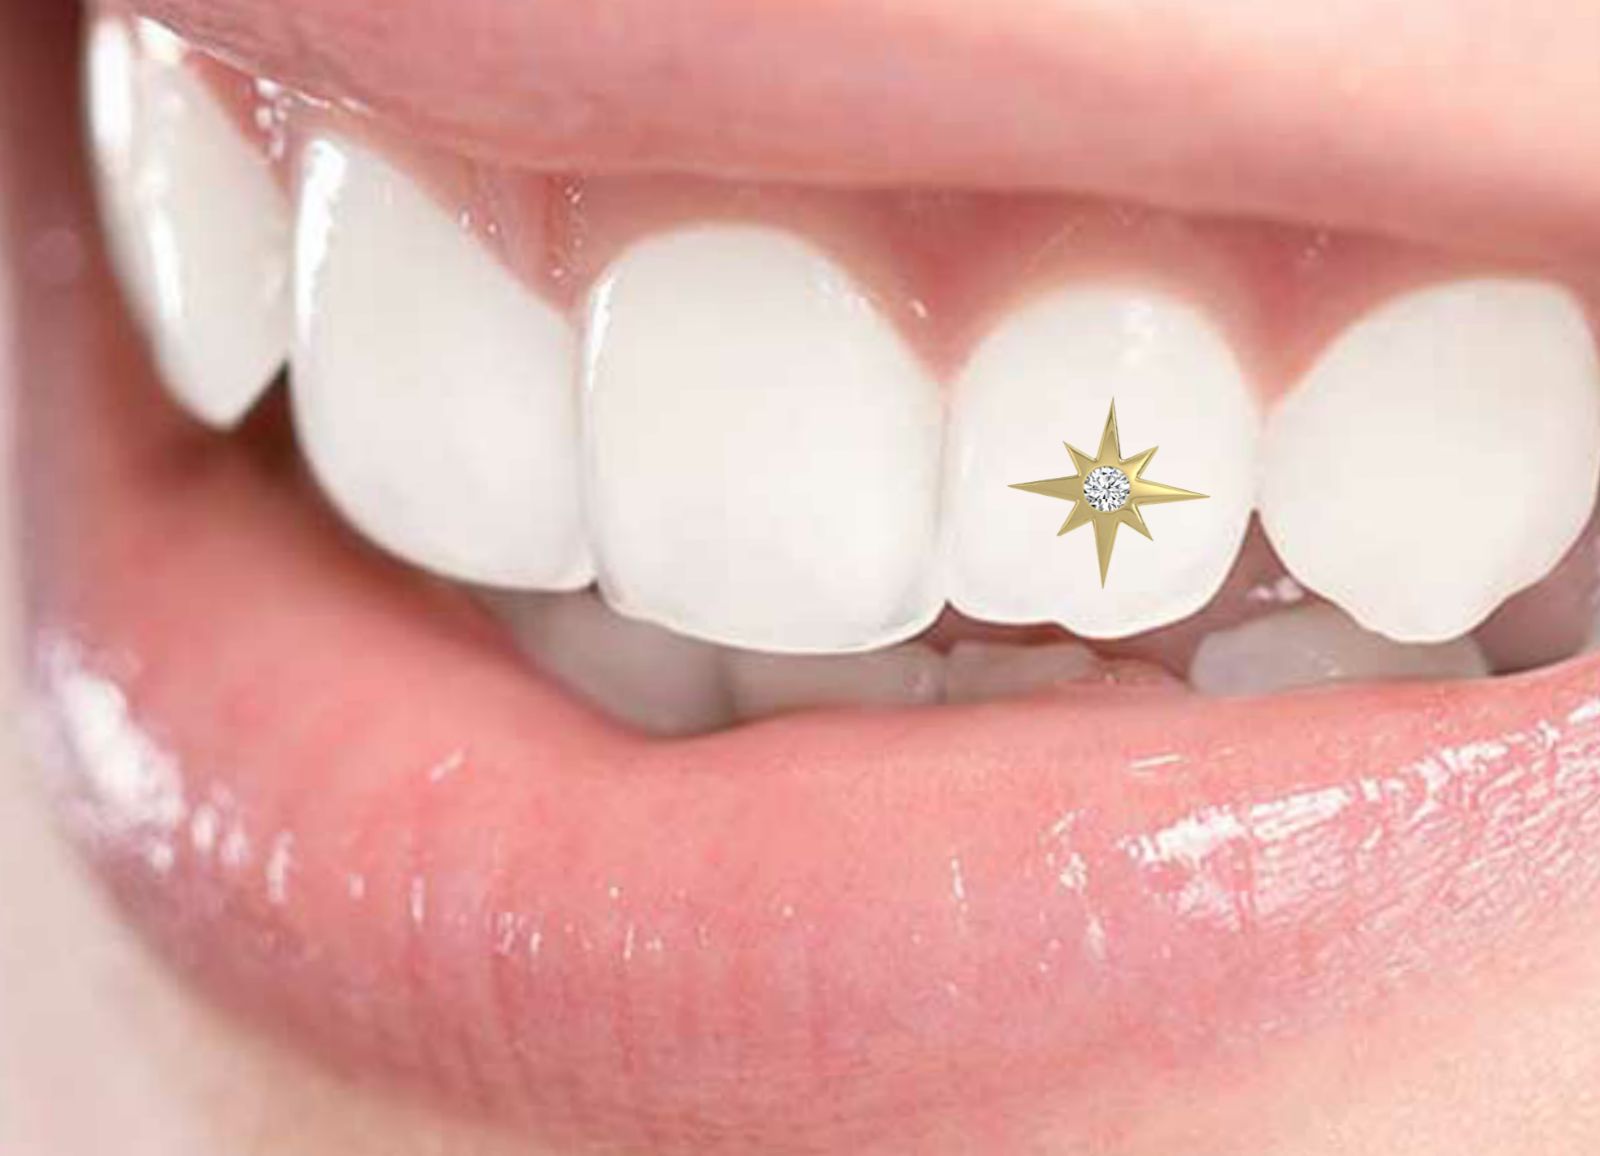 Twinkles 24K Yellow Gold Tooth Gems Small Star